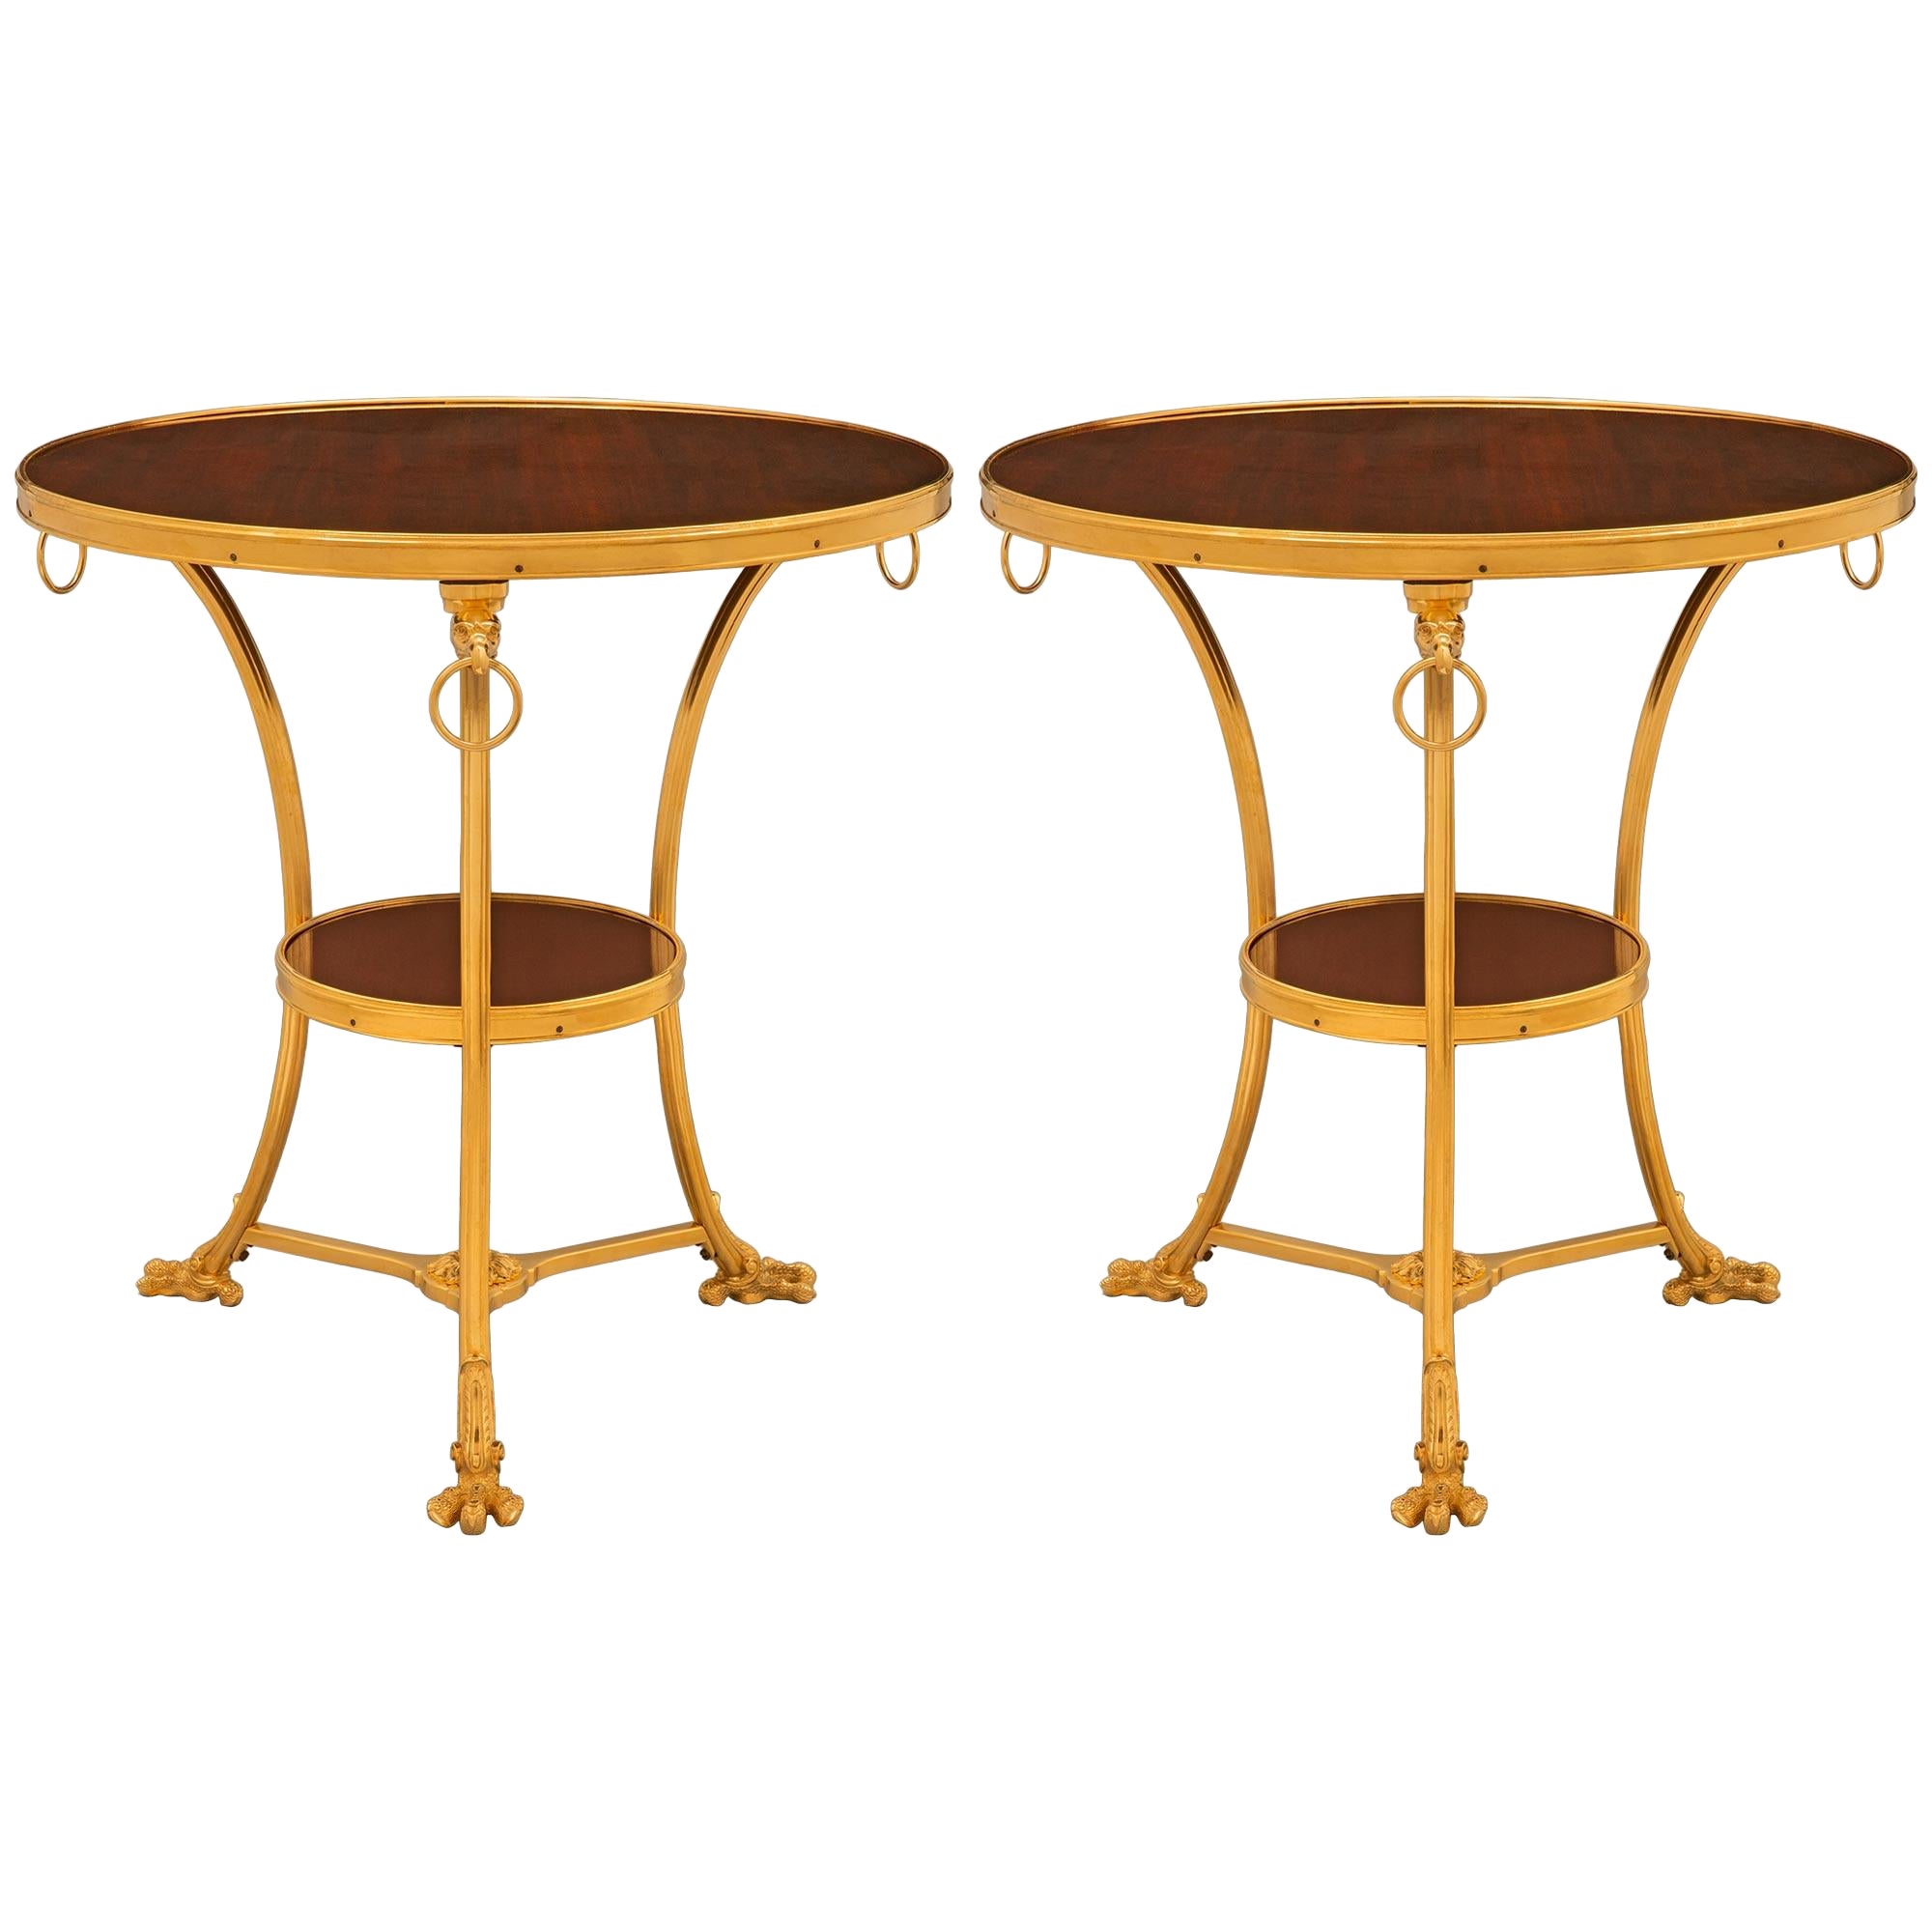 Pair of French 19th Century Neoclassical St. Ormolu and Mahogany Gueridon Tables